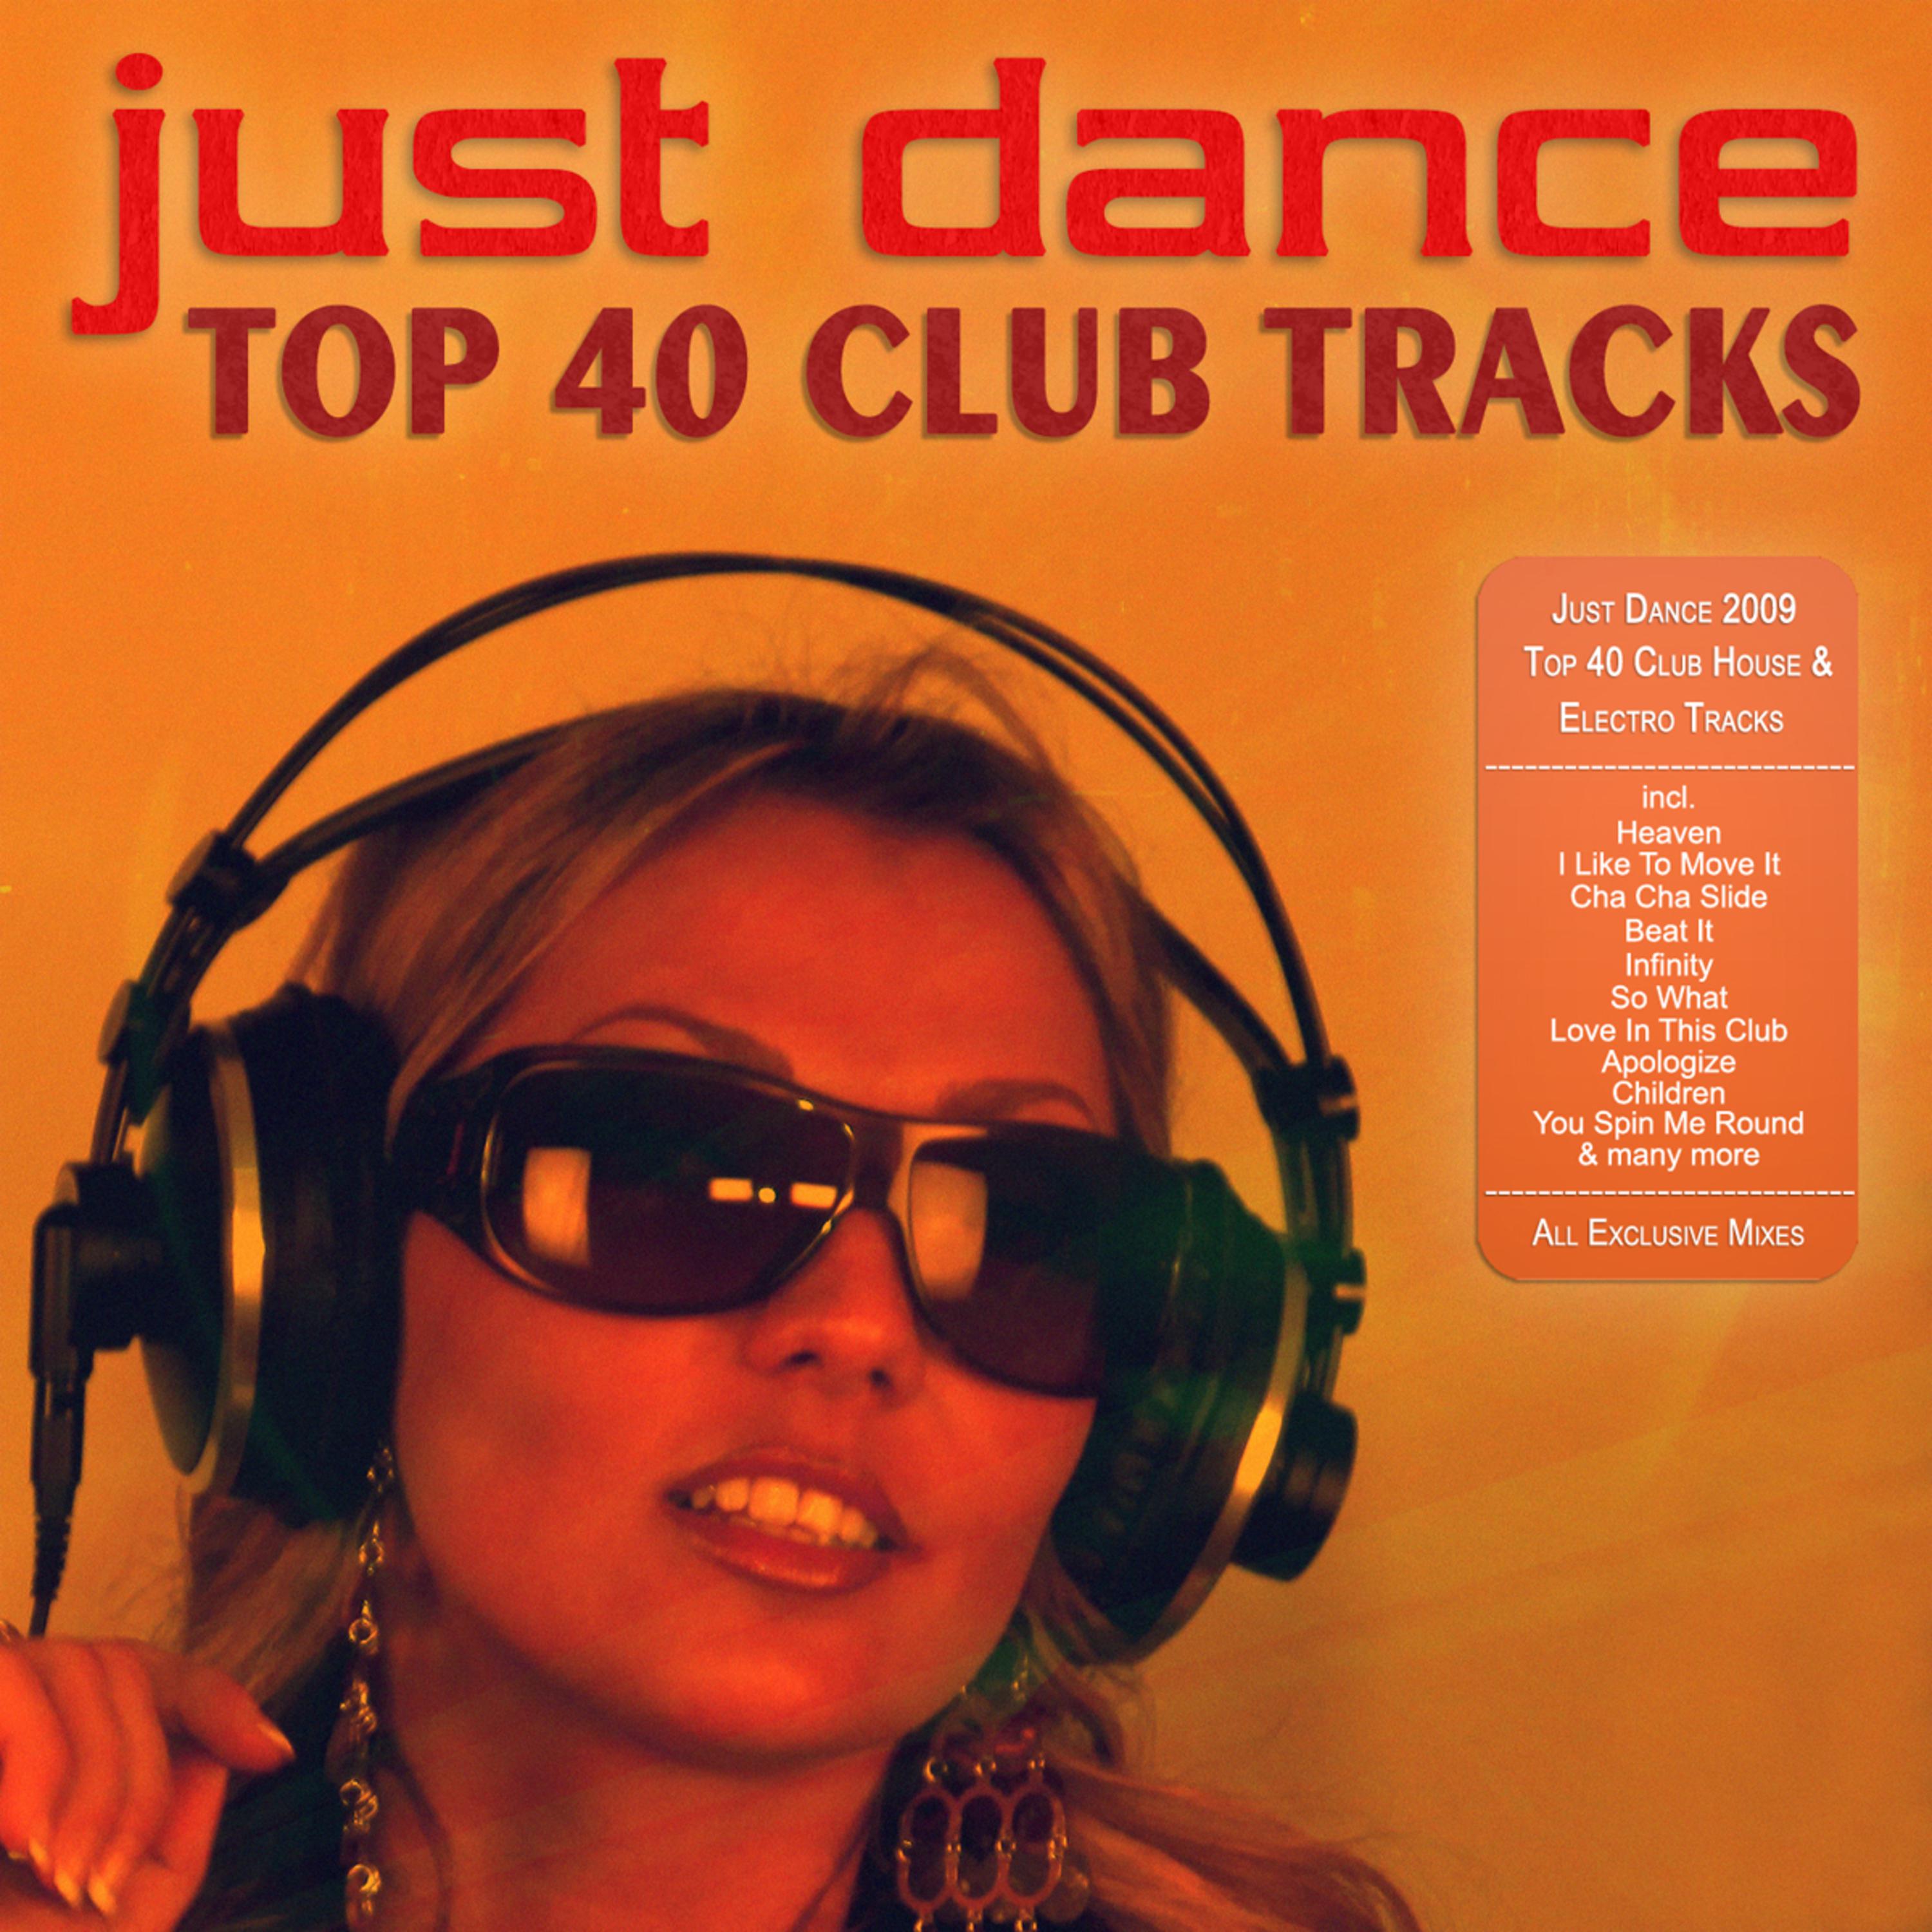 Just Dance 2009 - Top 40 Club House & Electro Tracks